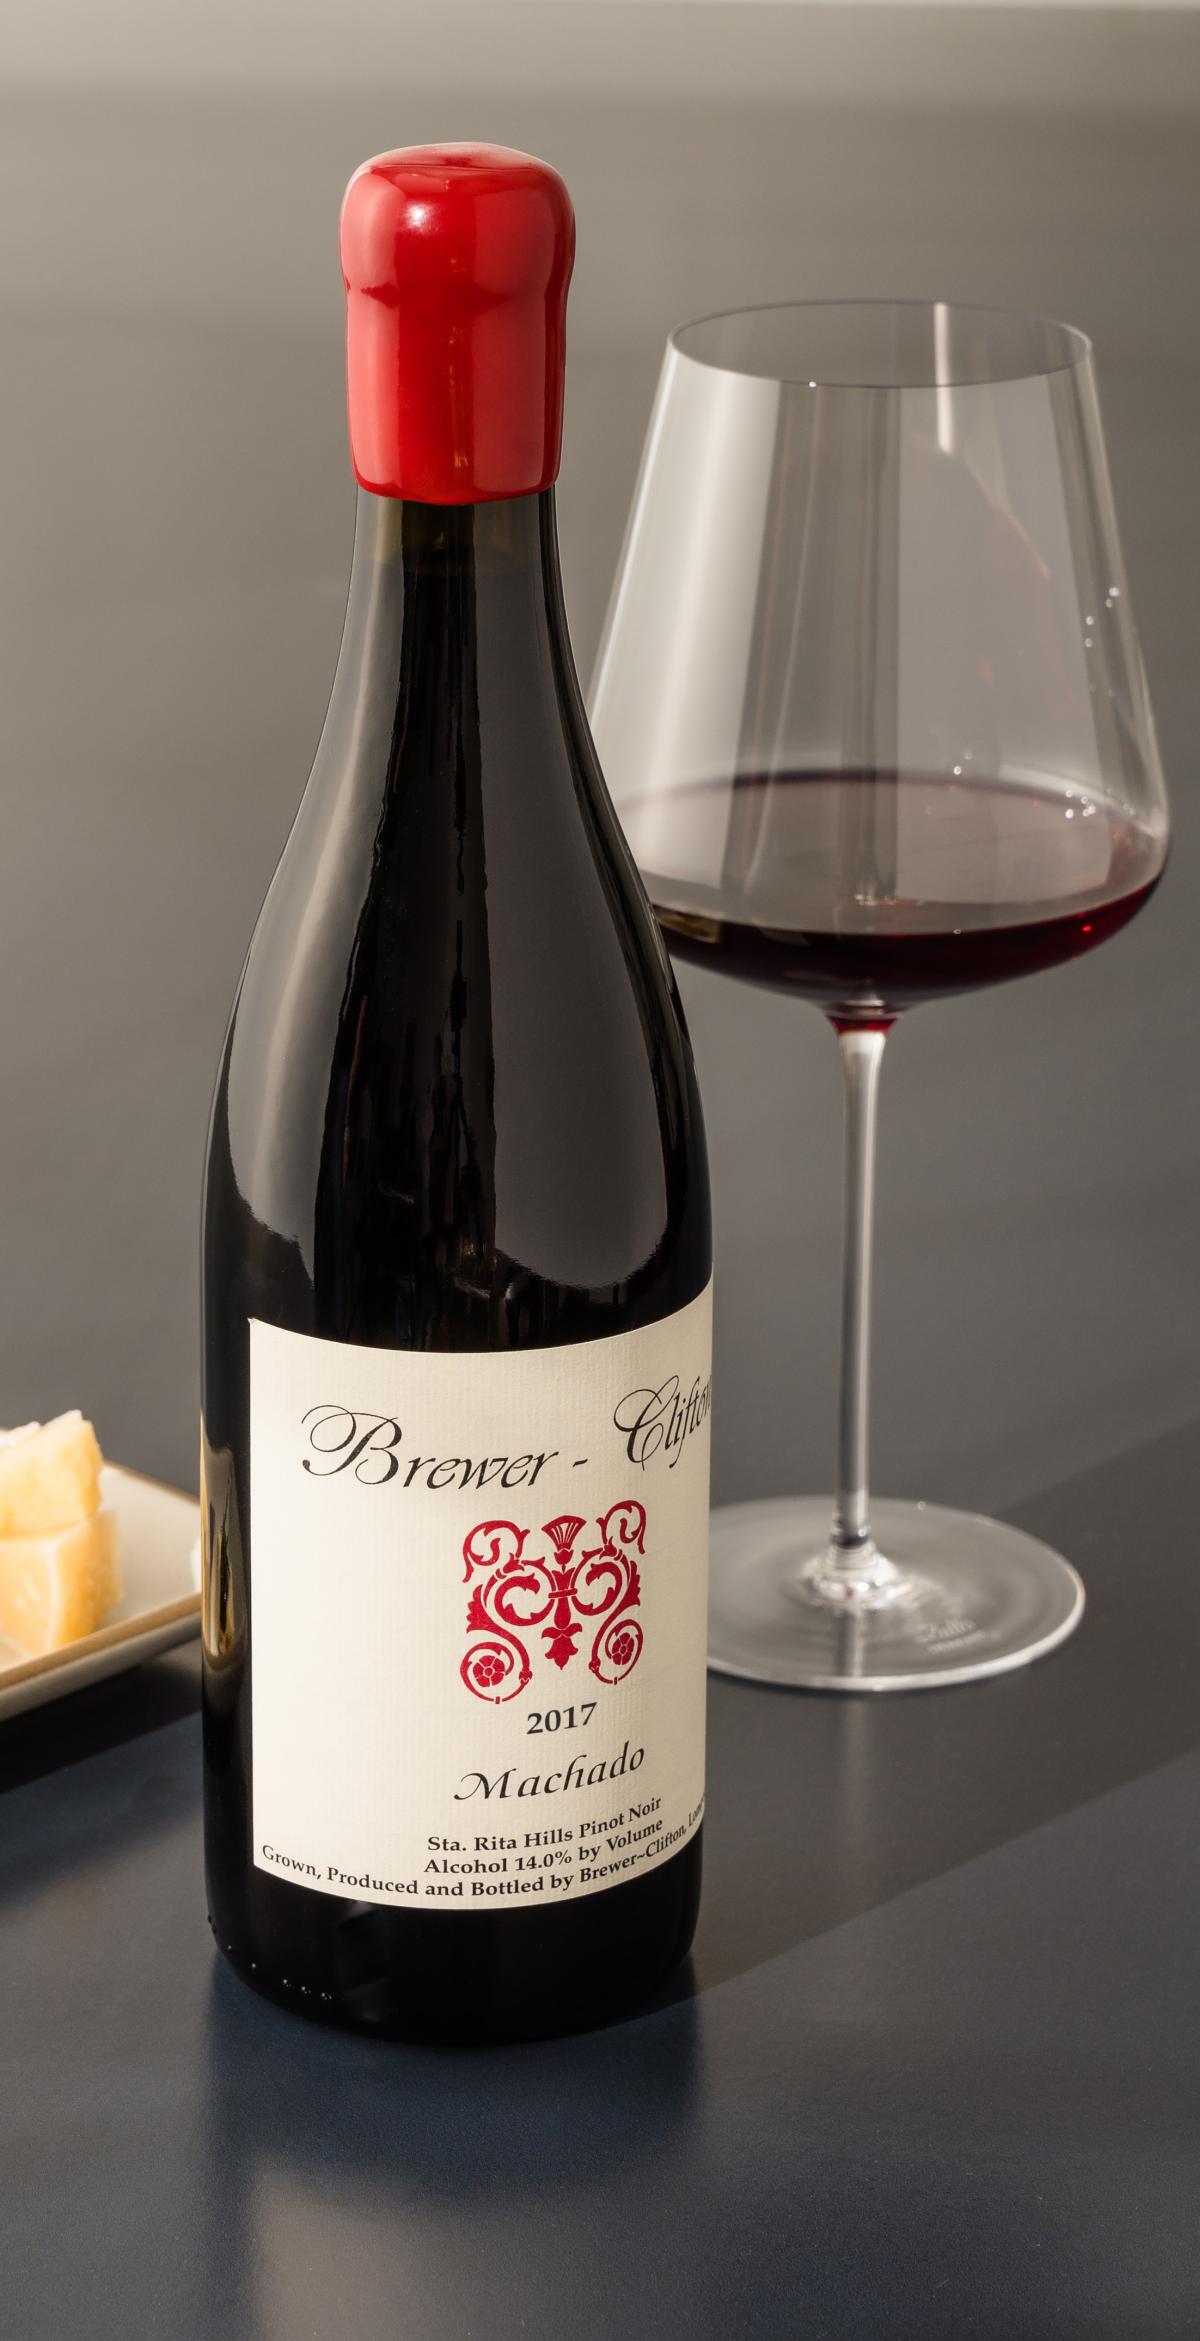 Brewer-Clifton Machado Pinot Noir 2017 with wine glass and cheese 